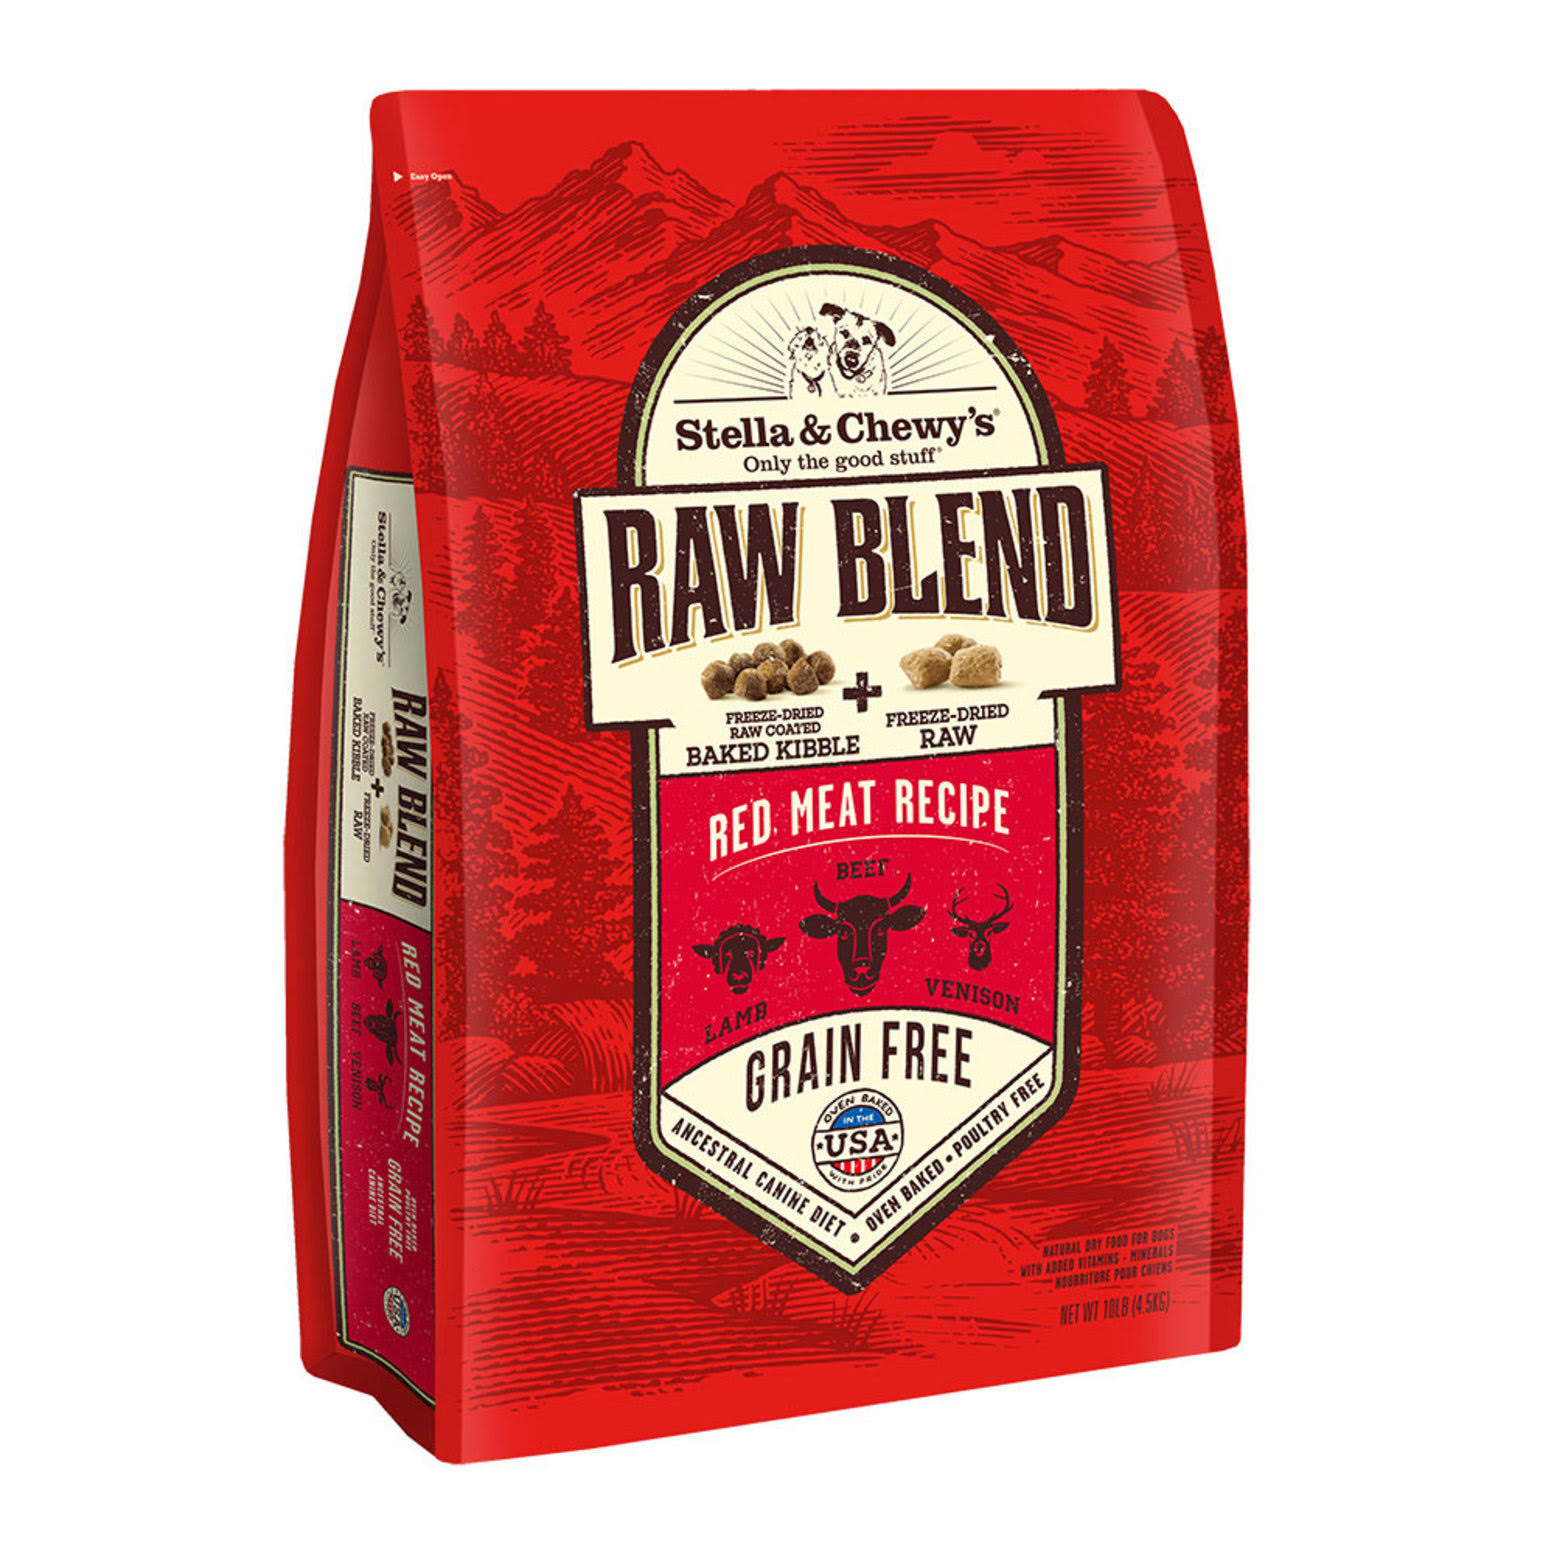 Stella & Chewy's Raw Blend Dog Food - Red Meat Recipe